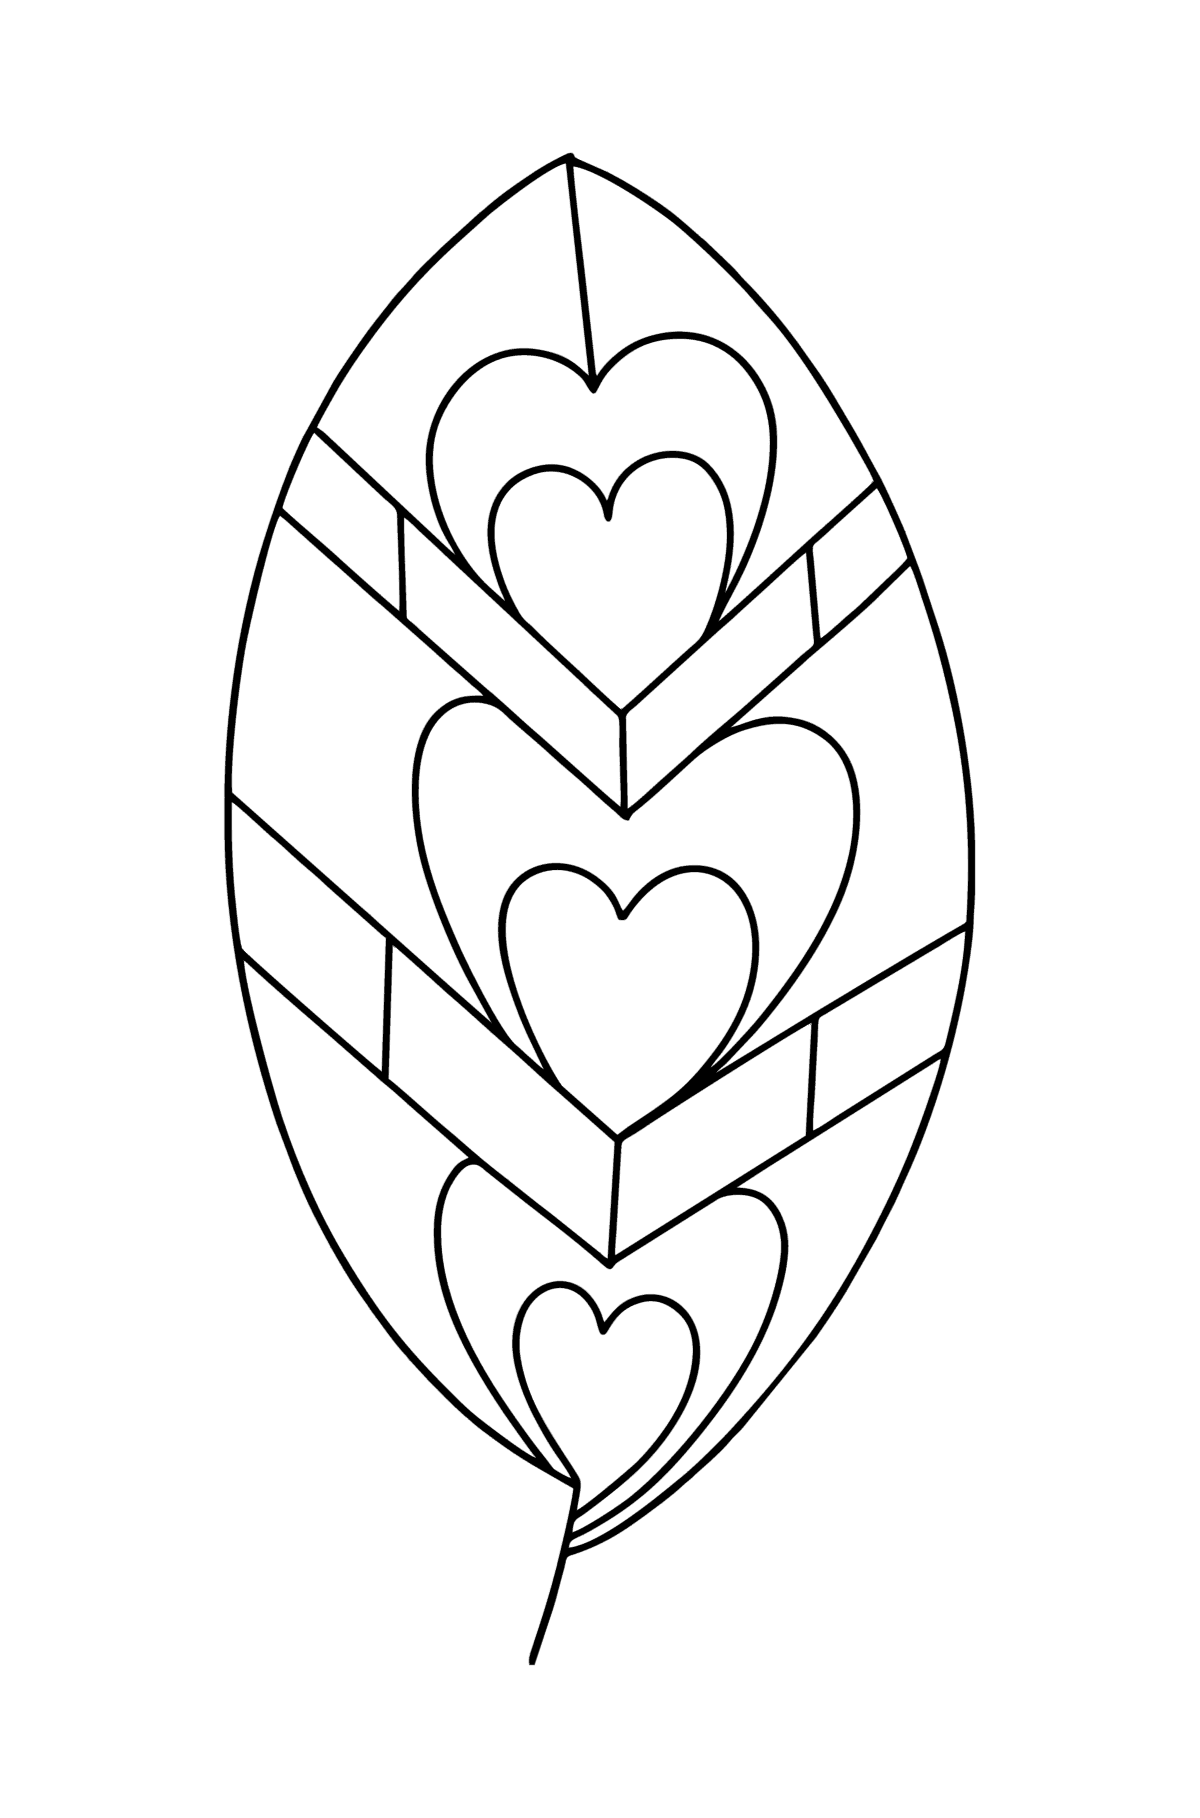 Zentangle Leaf coloring page - Coloring Pages for Kids